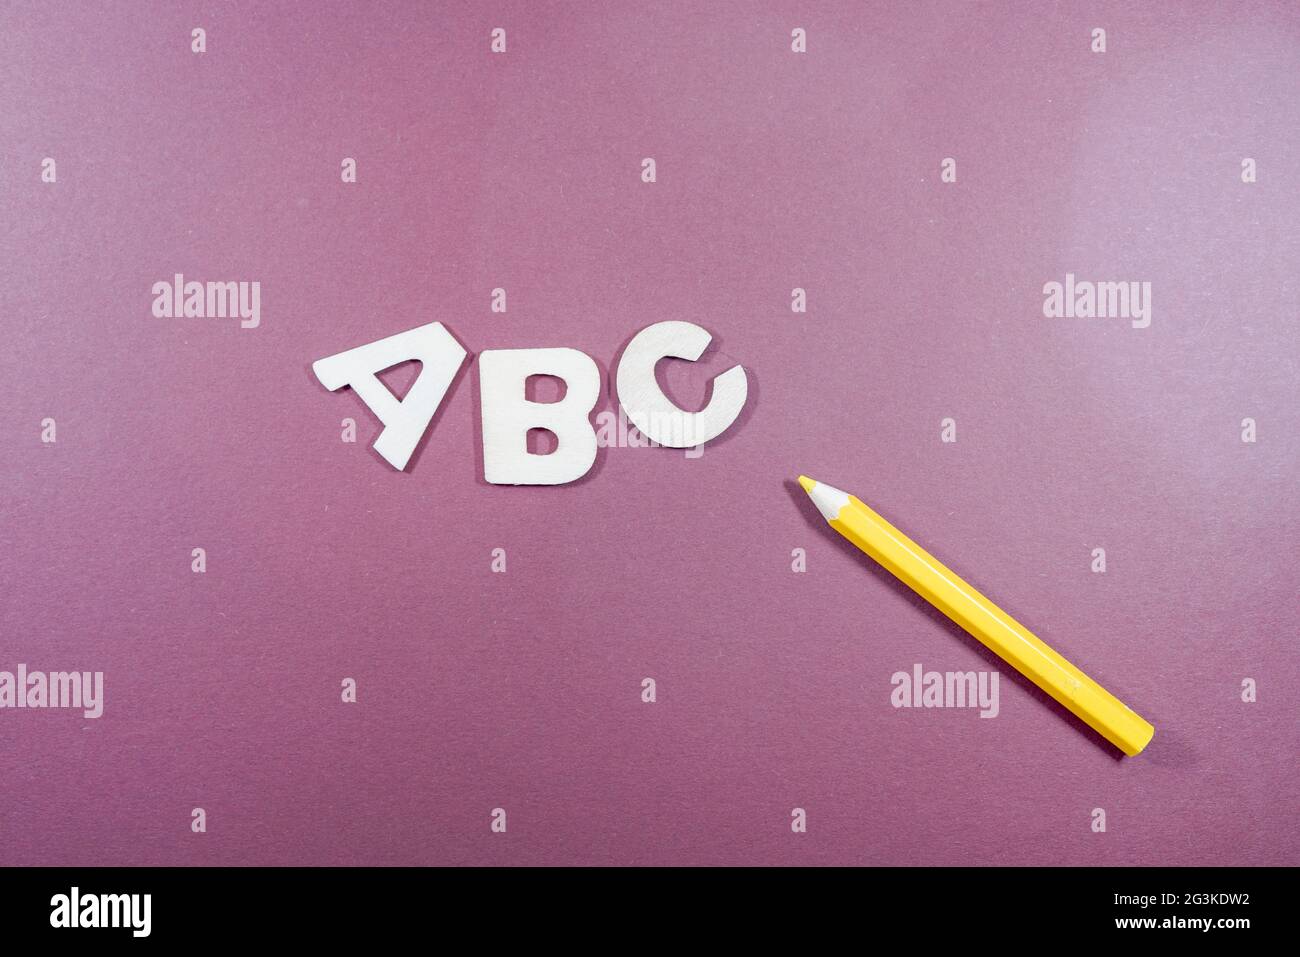 Top view of 'ABC' letters on a purple surface with a yellow pencil Stock Photo